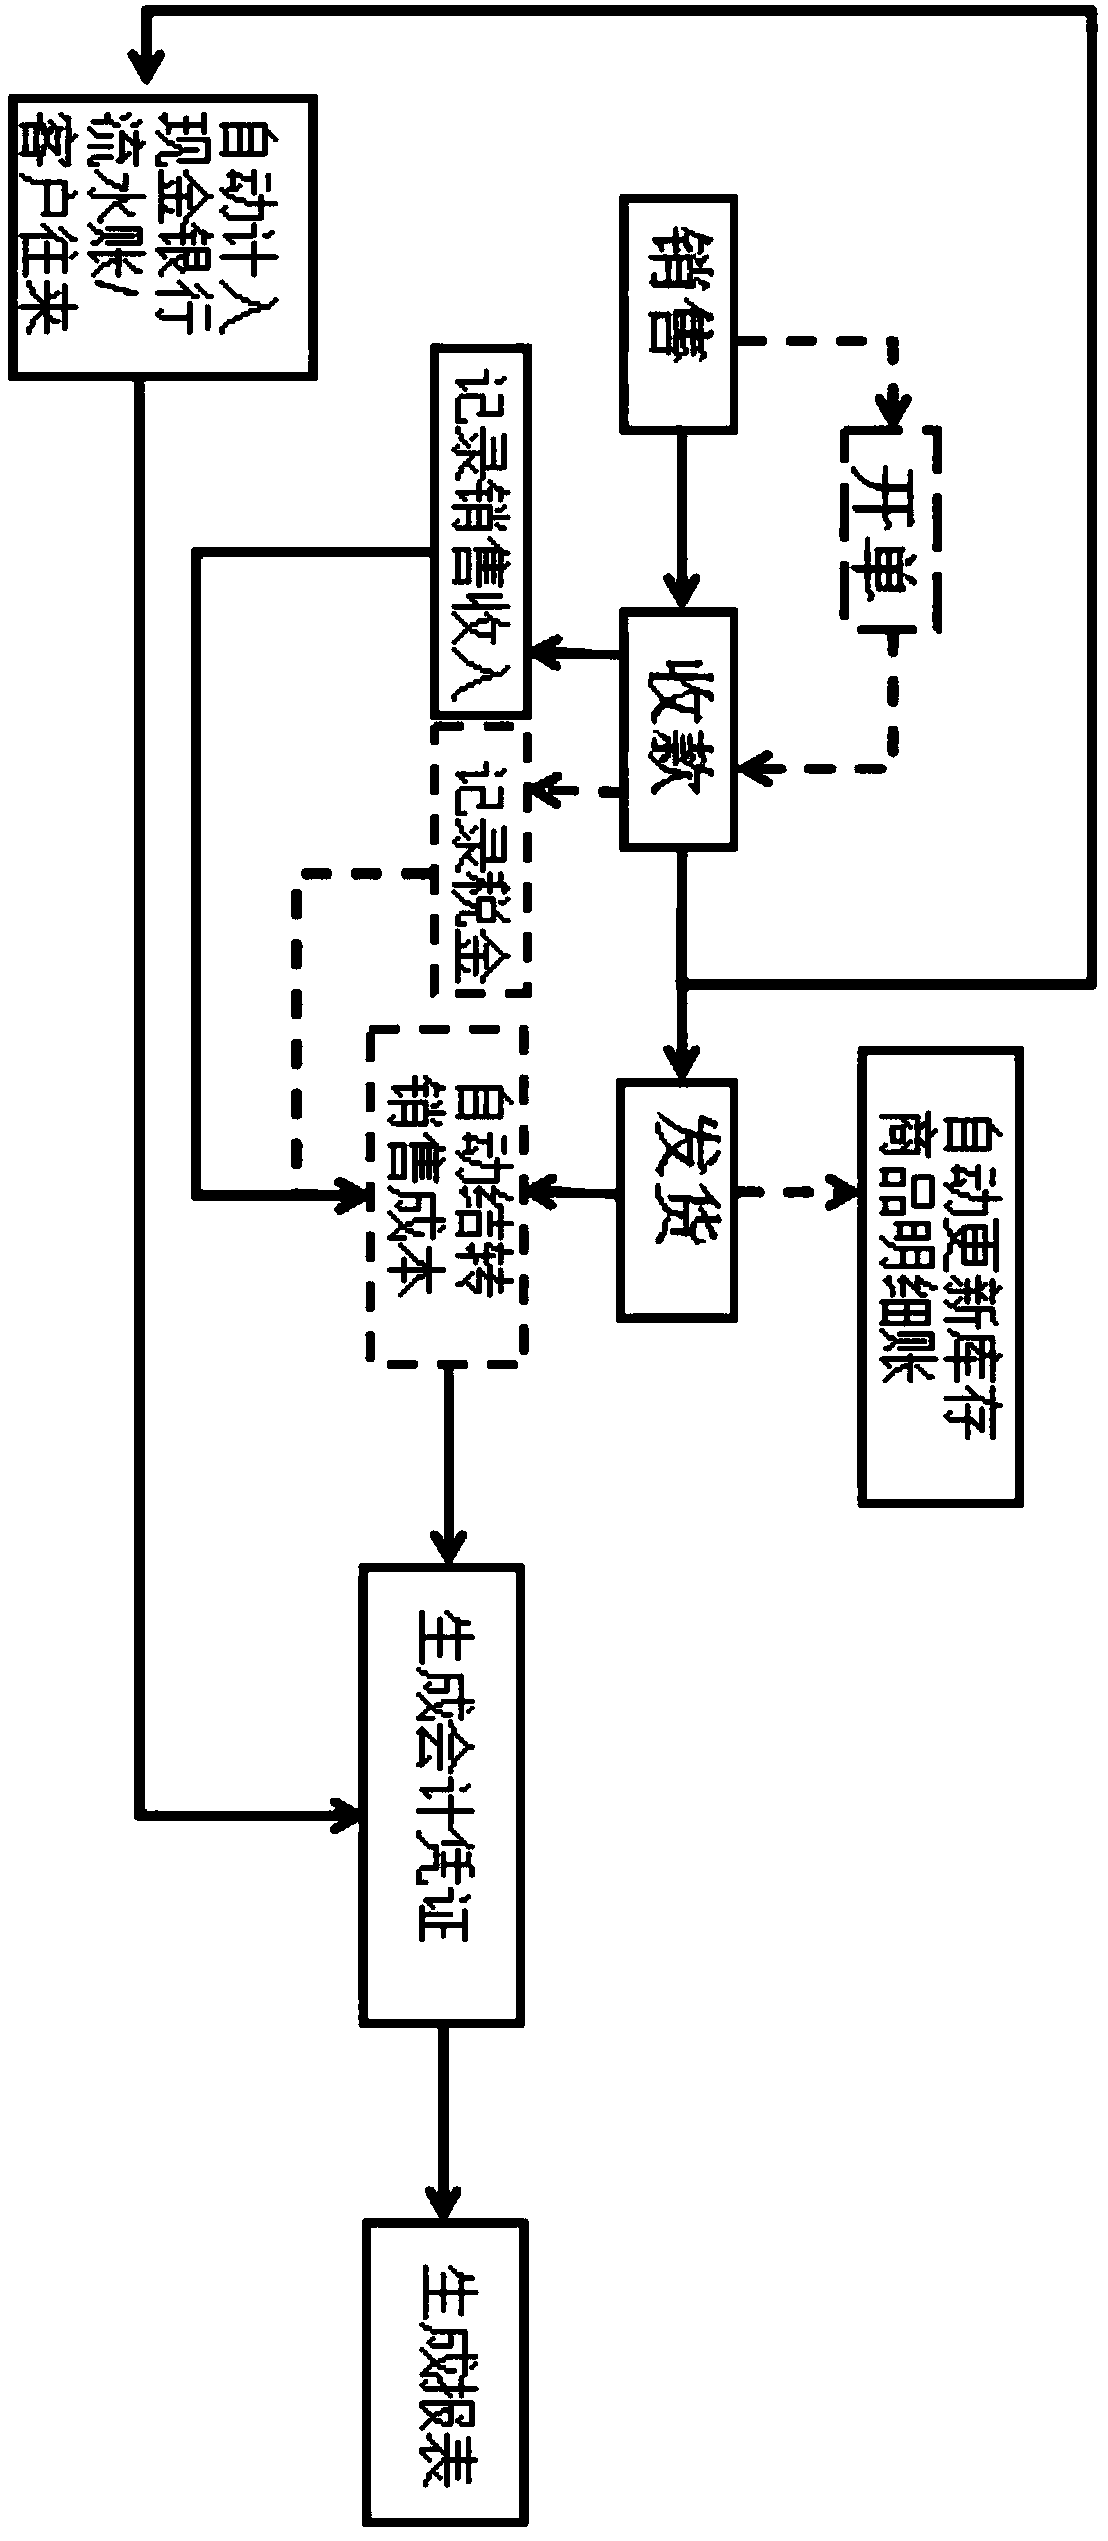 Financial automation system and method based on business economic service process